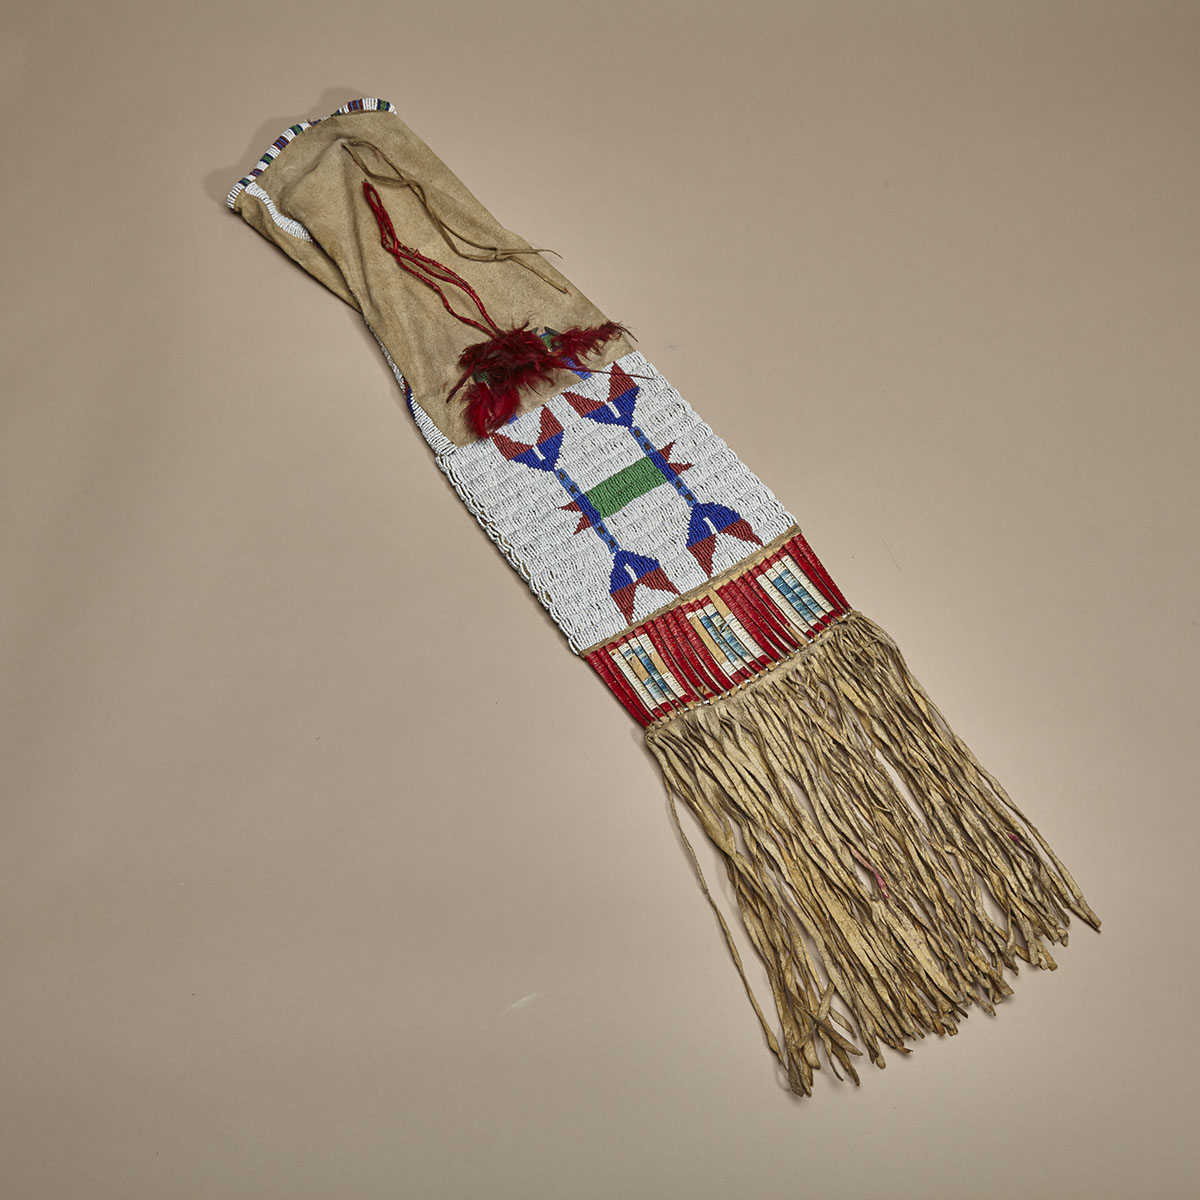 CENTRAL PLAINS PIPE BAG DECORATED WITH SEED BEADS AND PORCUPINE QUILL, BELLS AND DYED FEATHERS